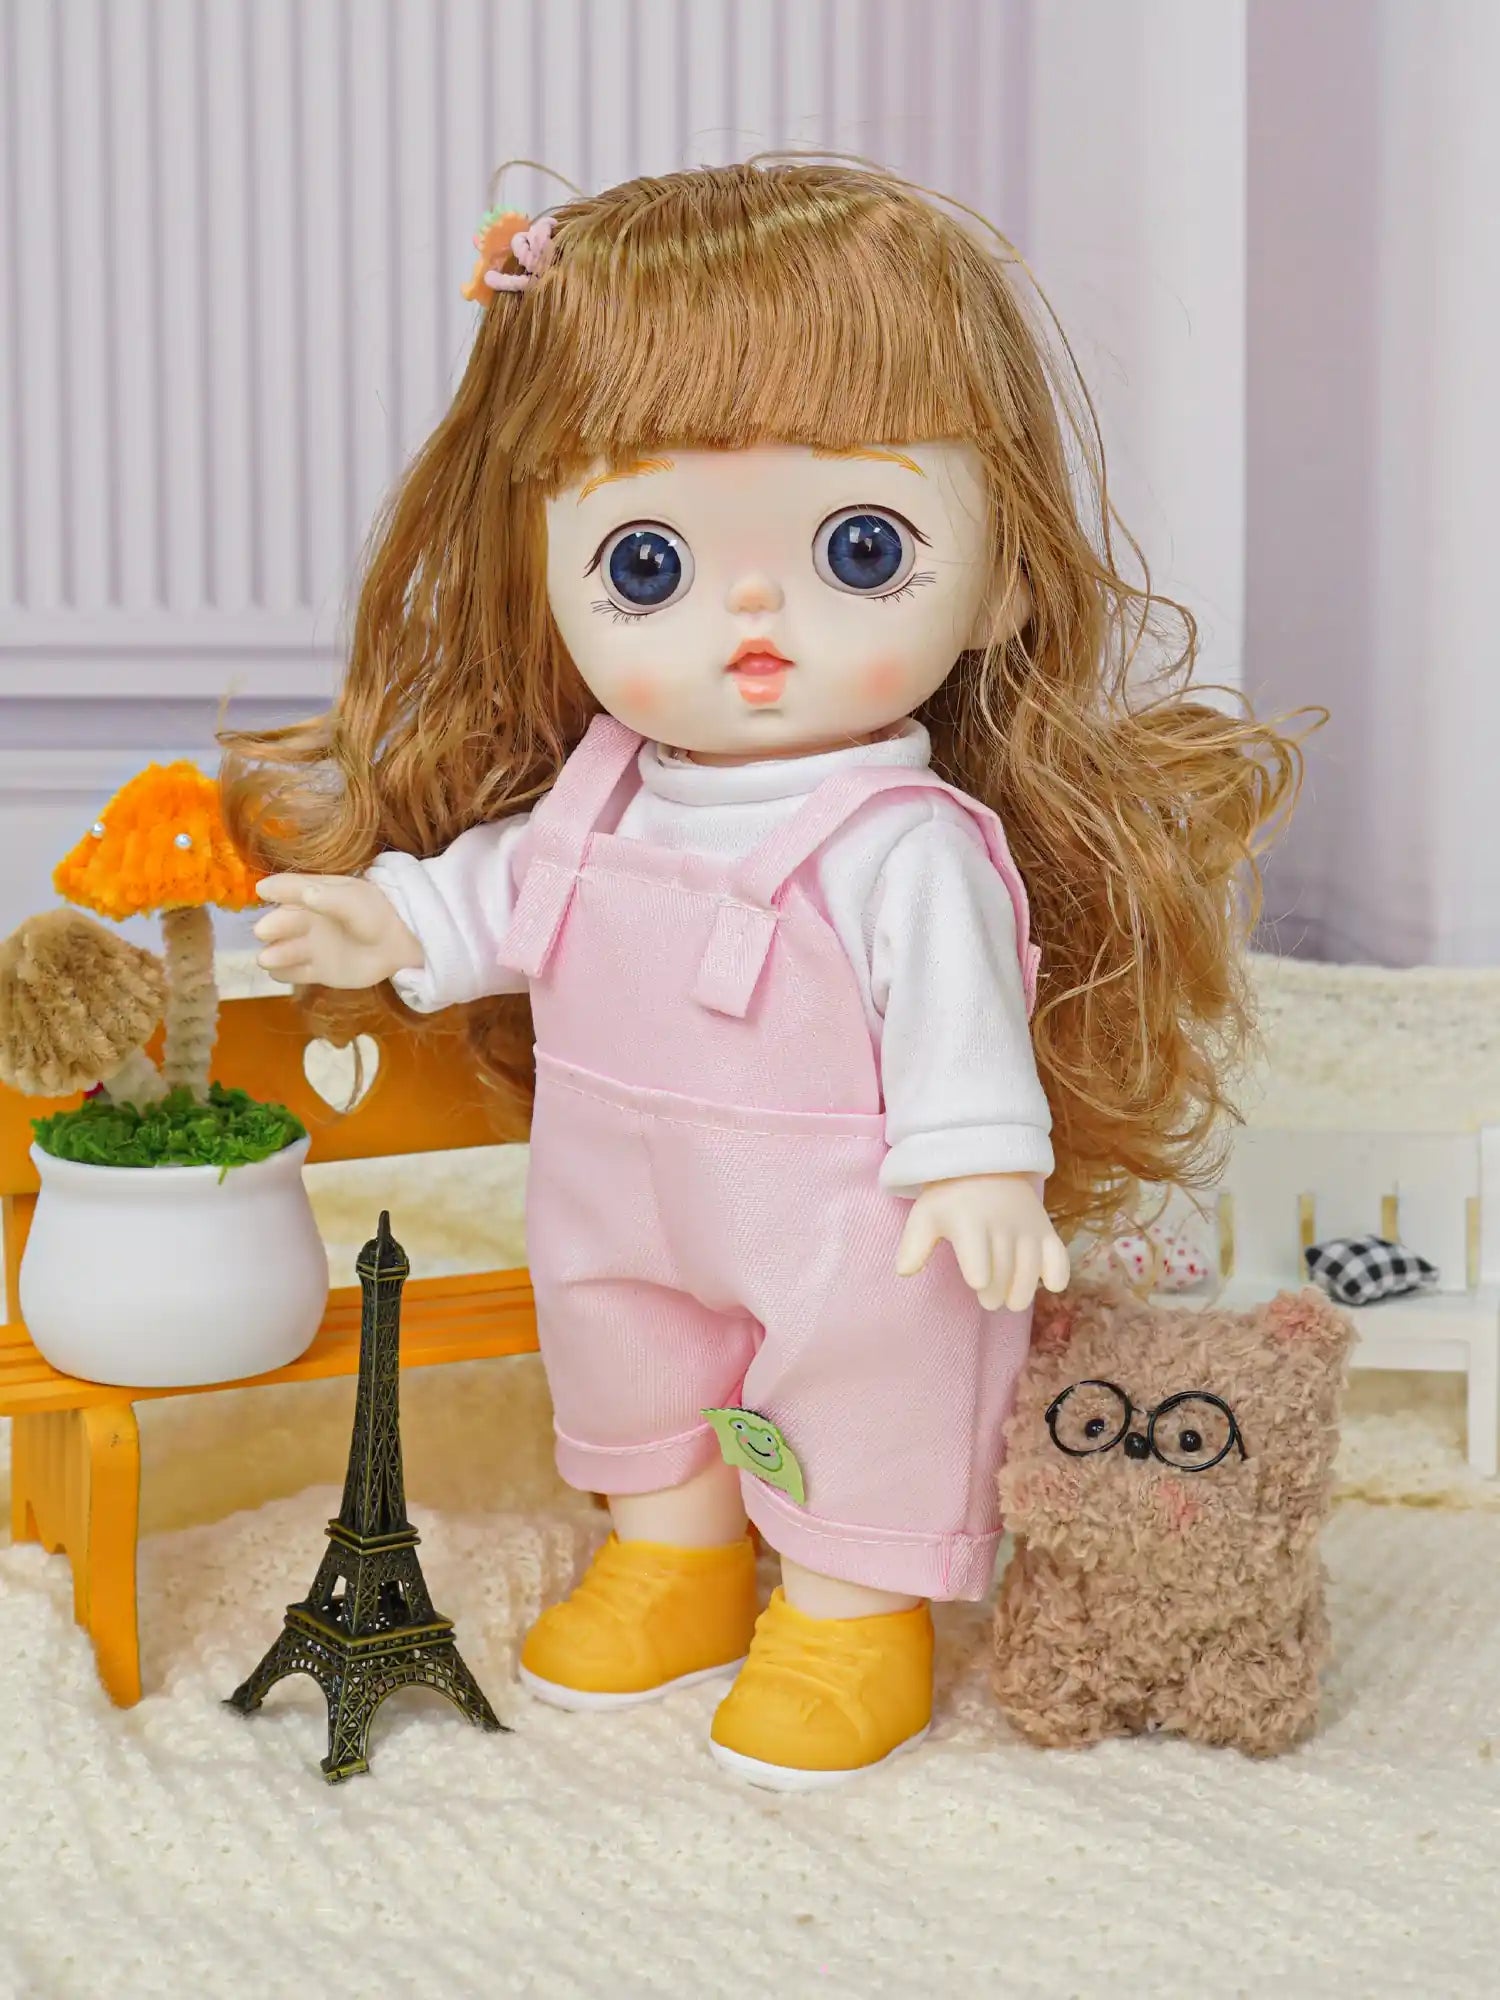 A doll with light brown hair and striking blue eyes wearing a pink pinafore over a white shirt, standing with a plush toy.